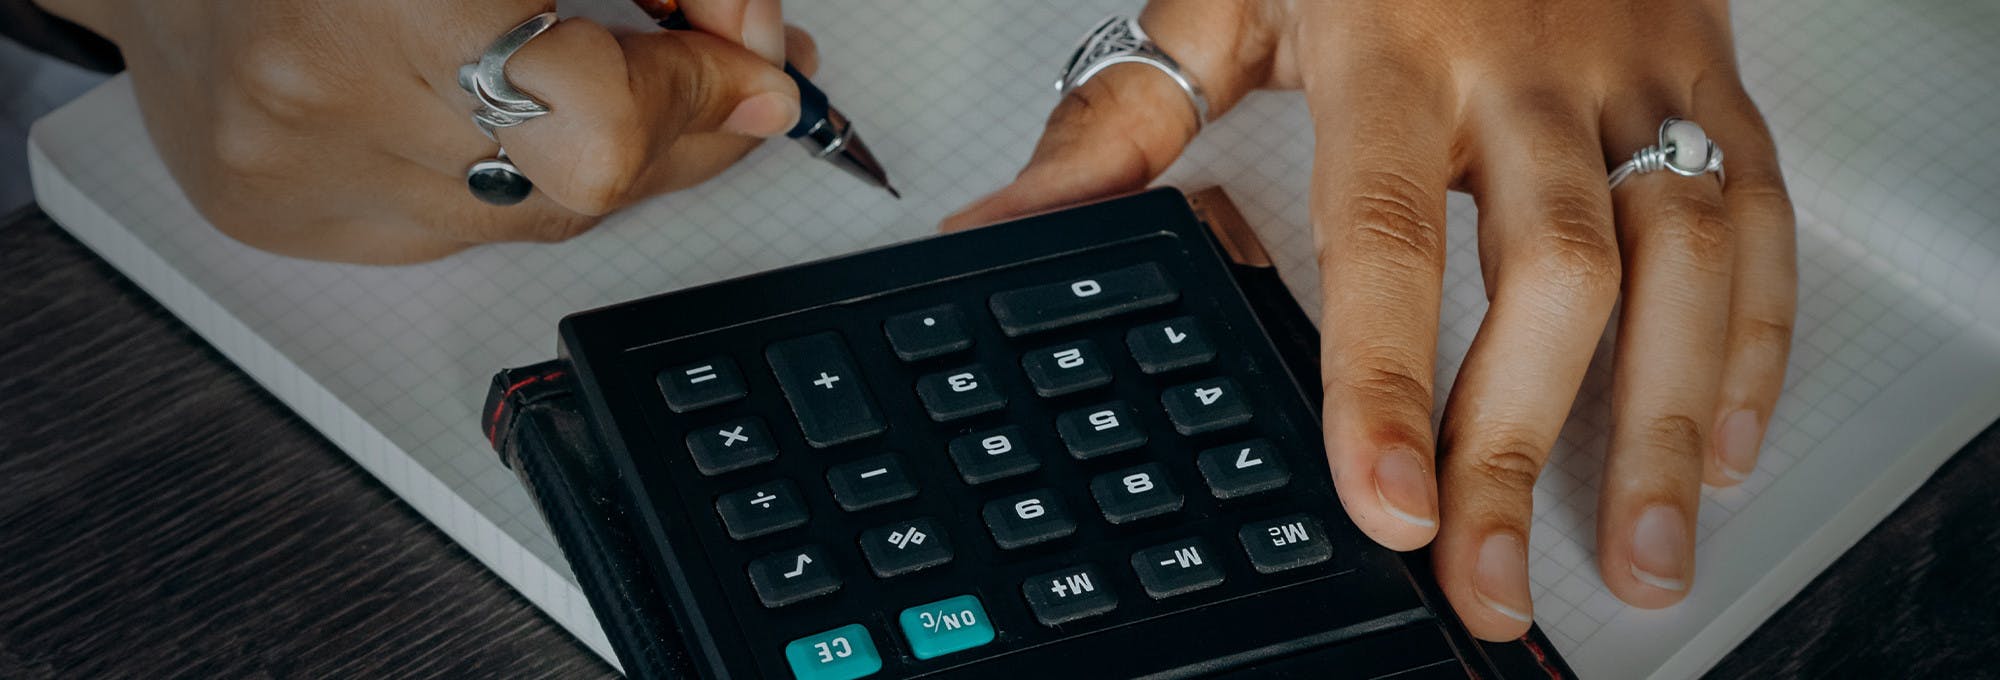 Hands using a calculator and paper to calculate student loans